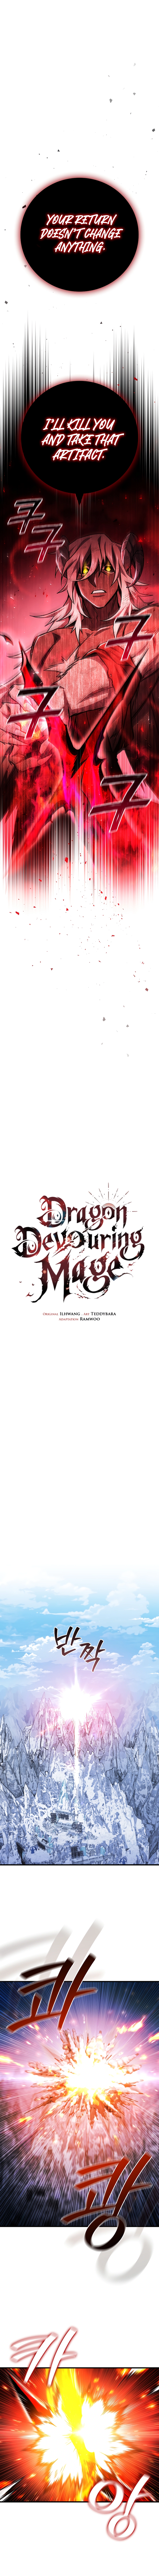 Dragon-Devouring Mage, Chapter 52 {S1 END} image 02